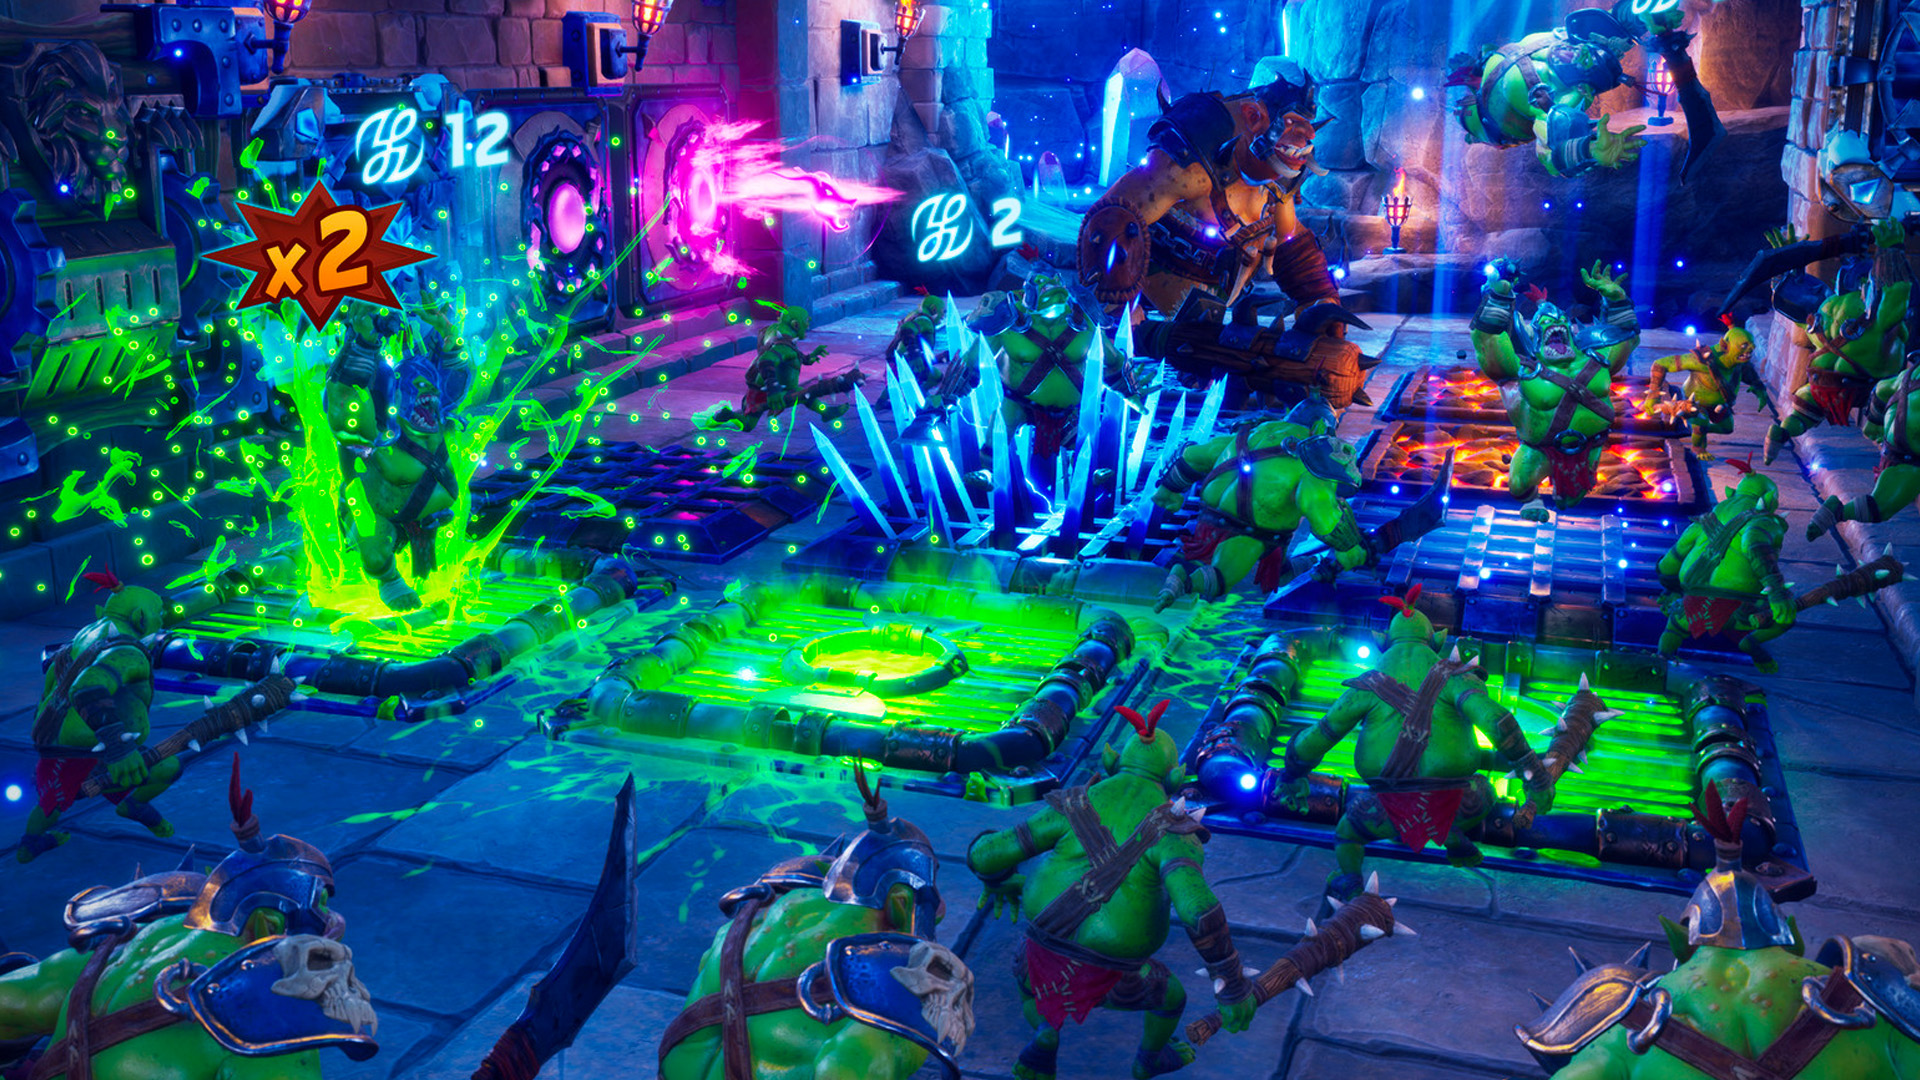 Best Tower Defense Game: In Orcs Must Die 3, green orcs line up in colorful rooms as they prepare to travel through Venom and Frost.